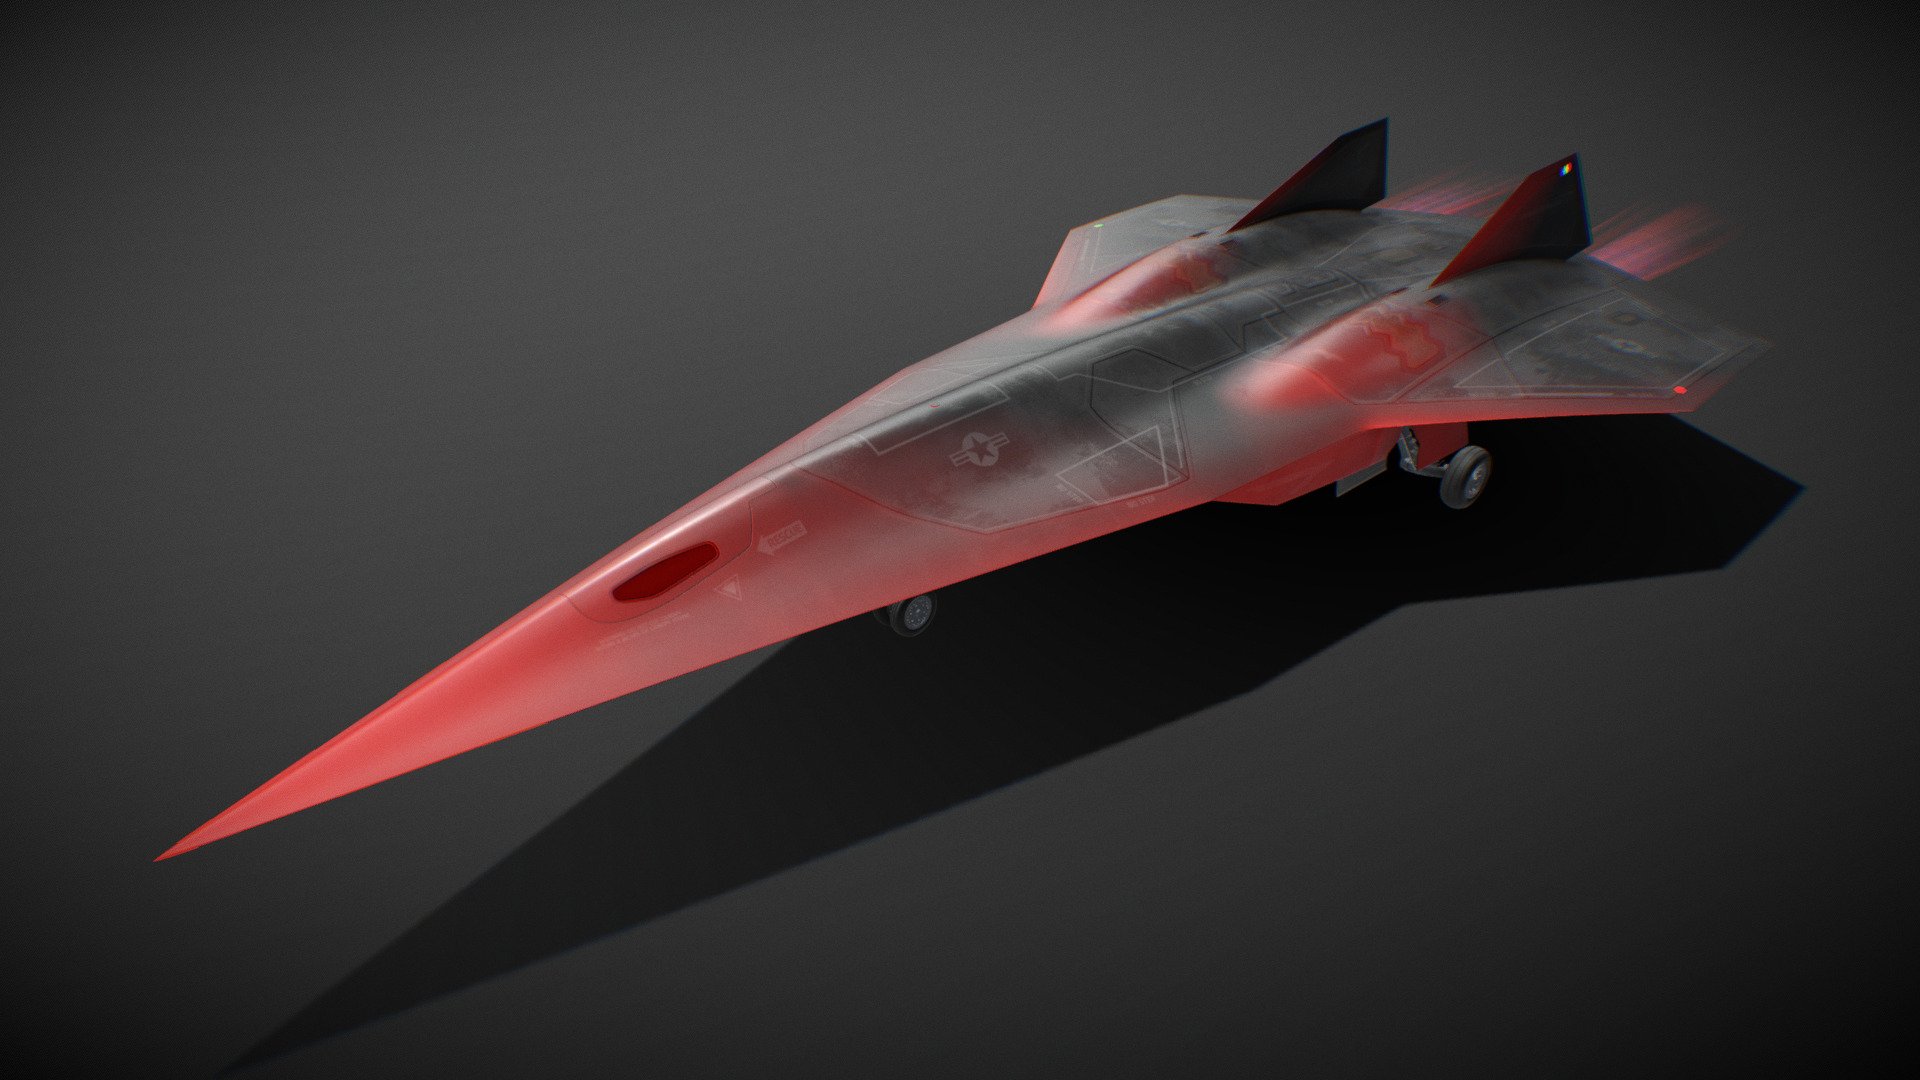 Lockheed gives details of the hypersonic plane Darkstar from Top